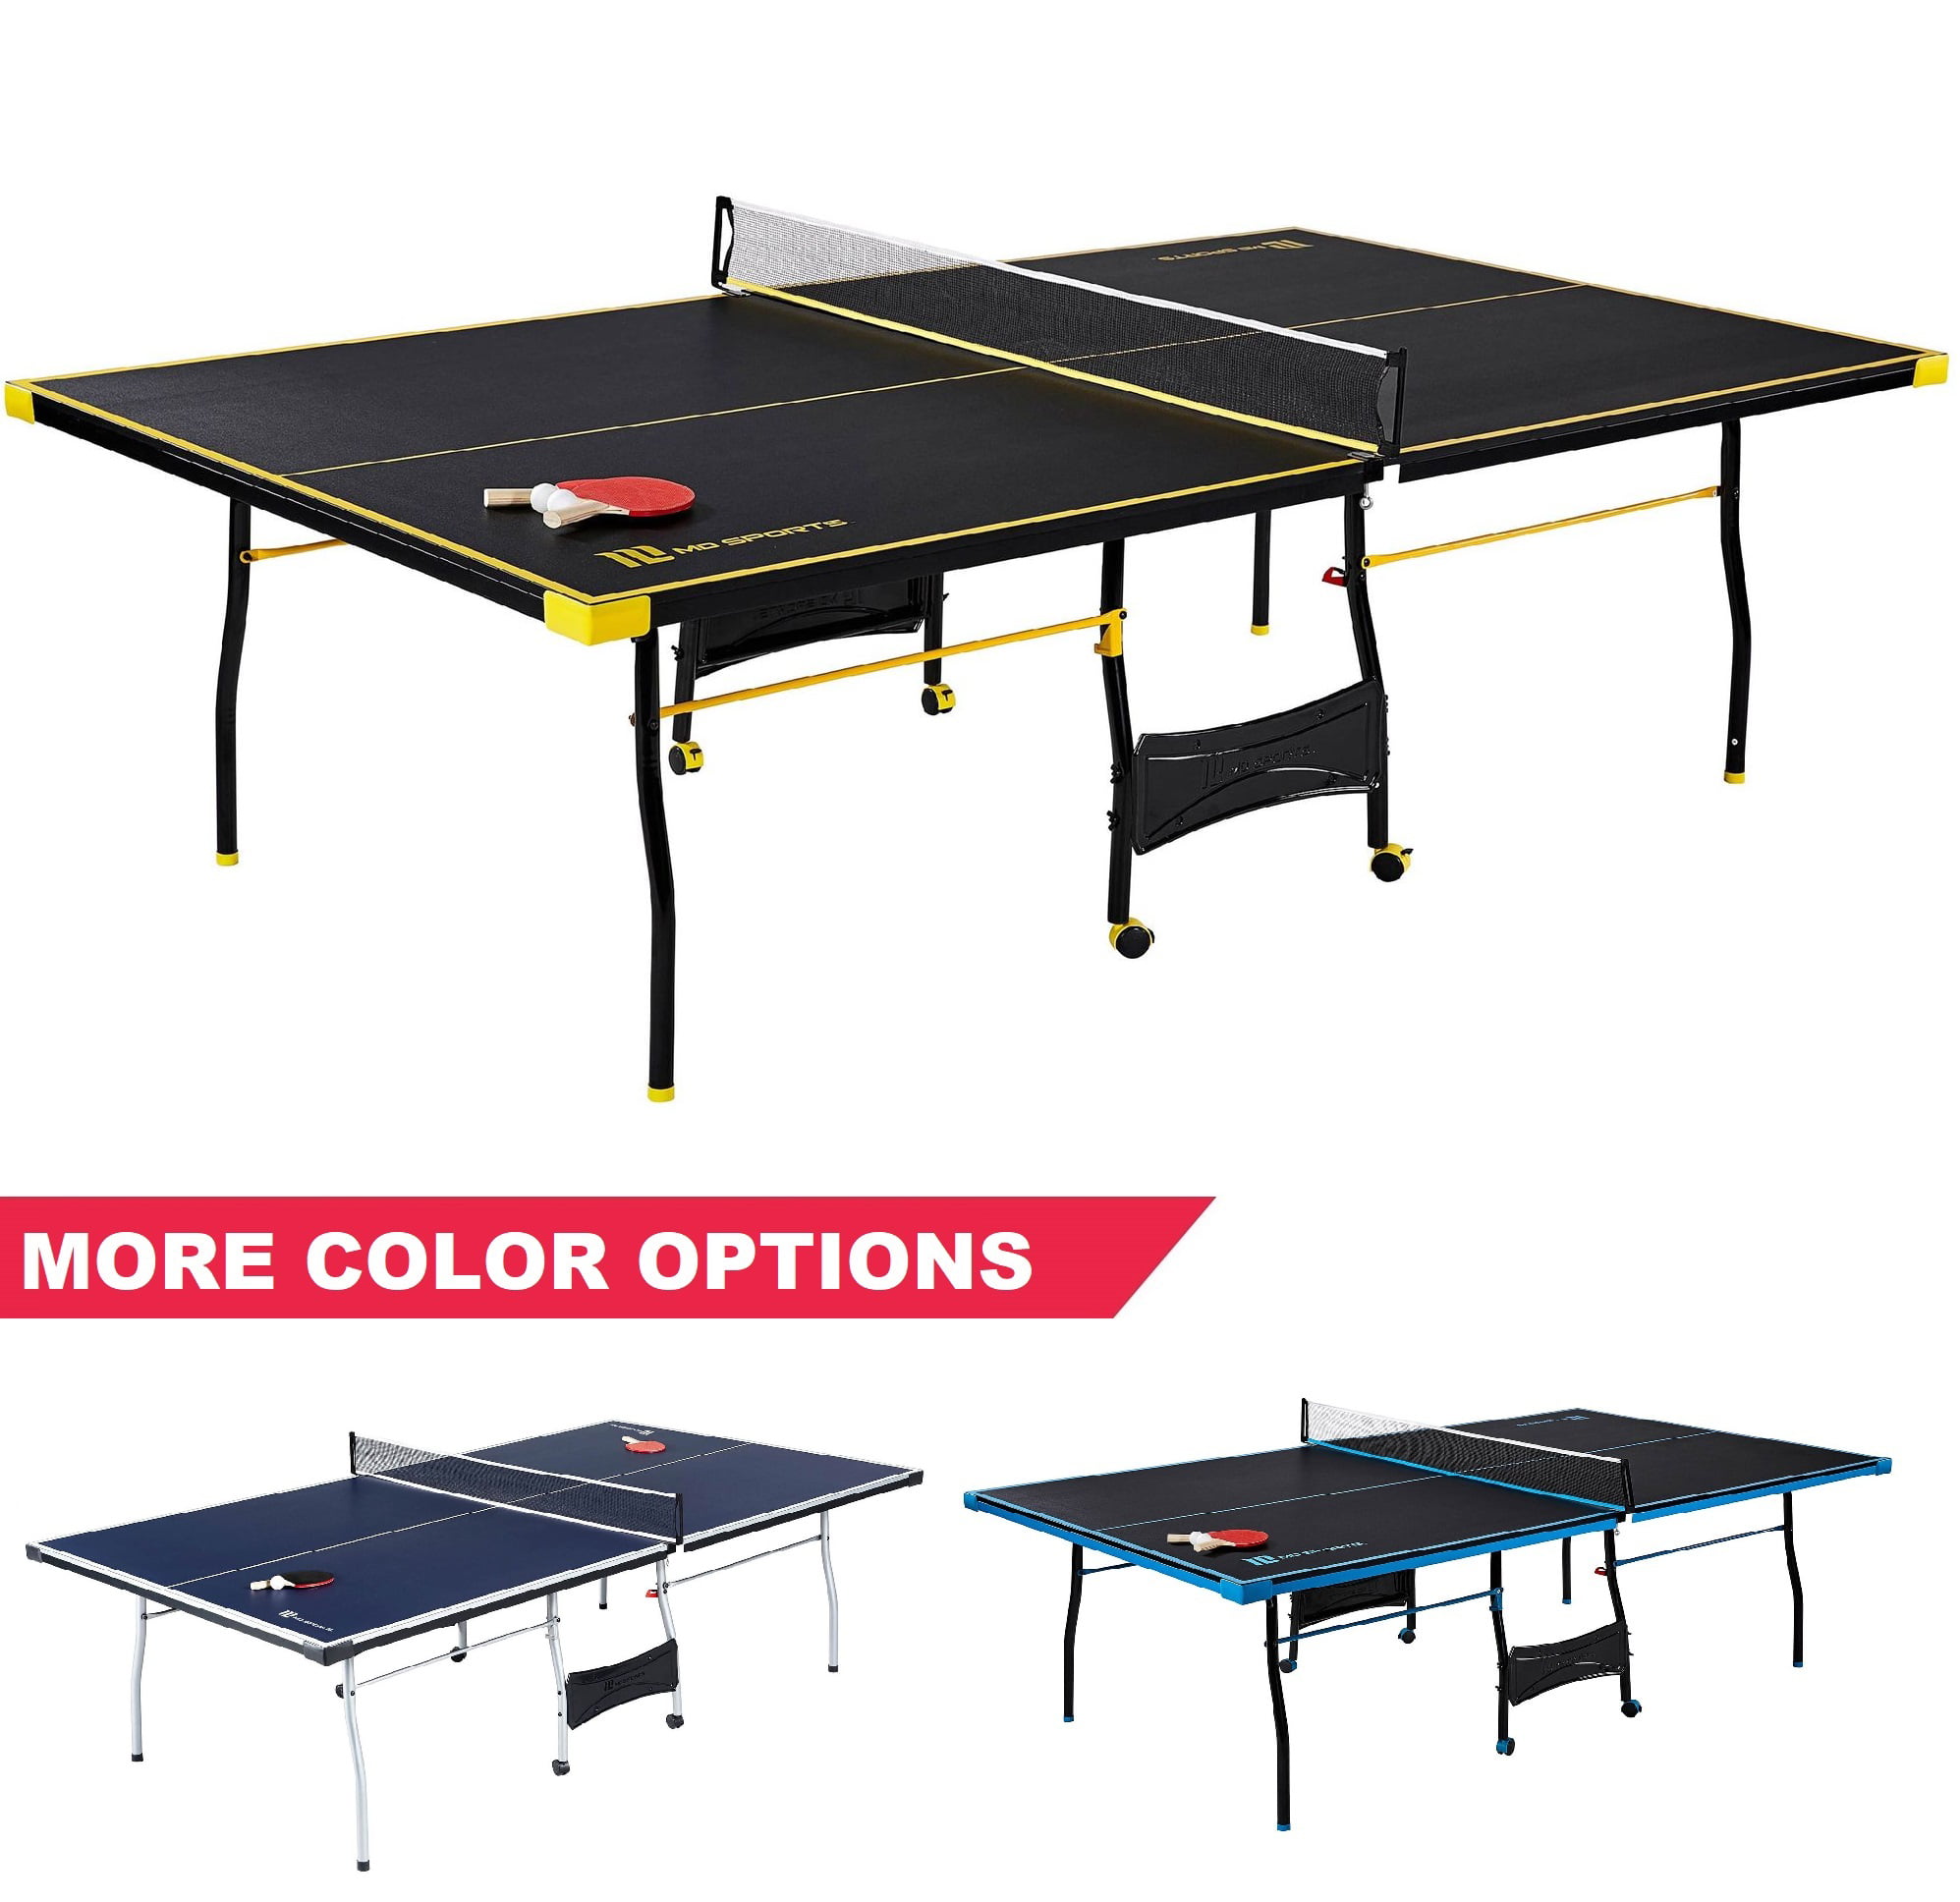 Ping Pong Table Storage Cover Indoor//Outdoor Table Tennis Sheet Waterproof